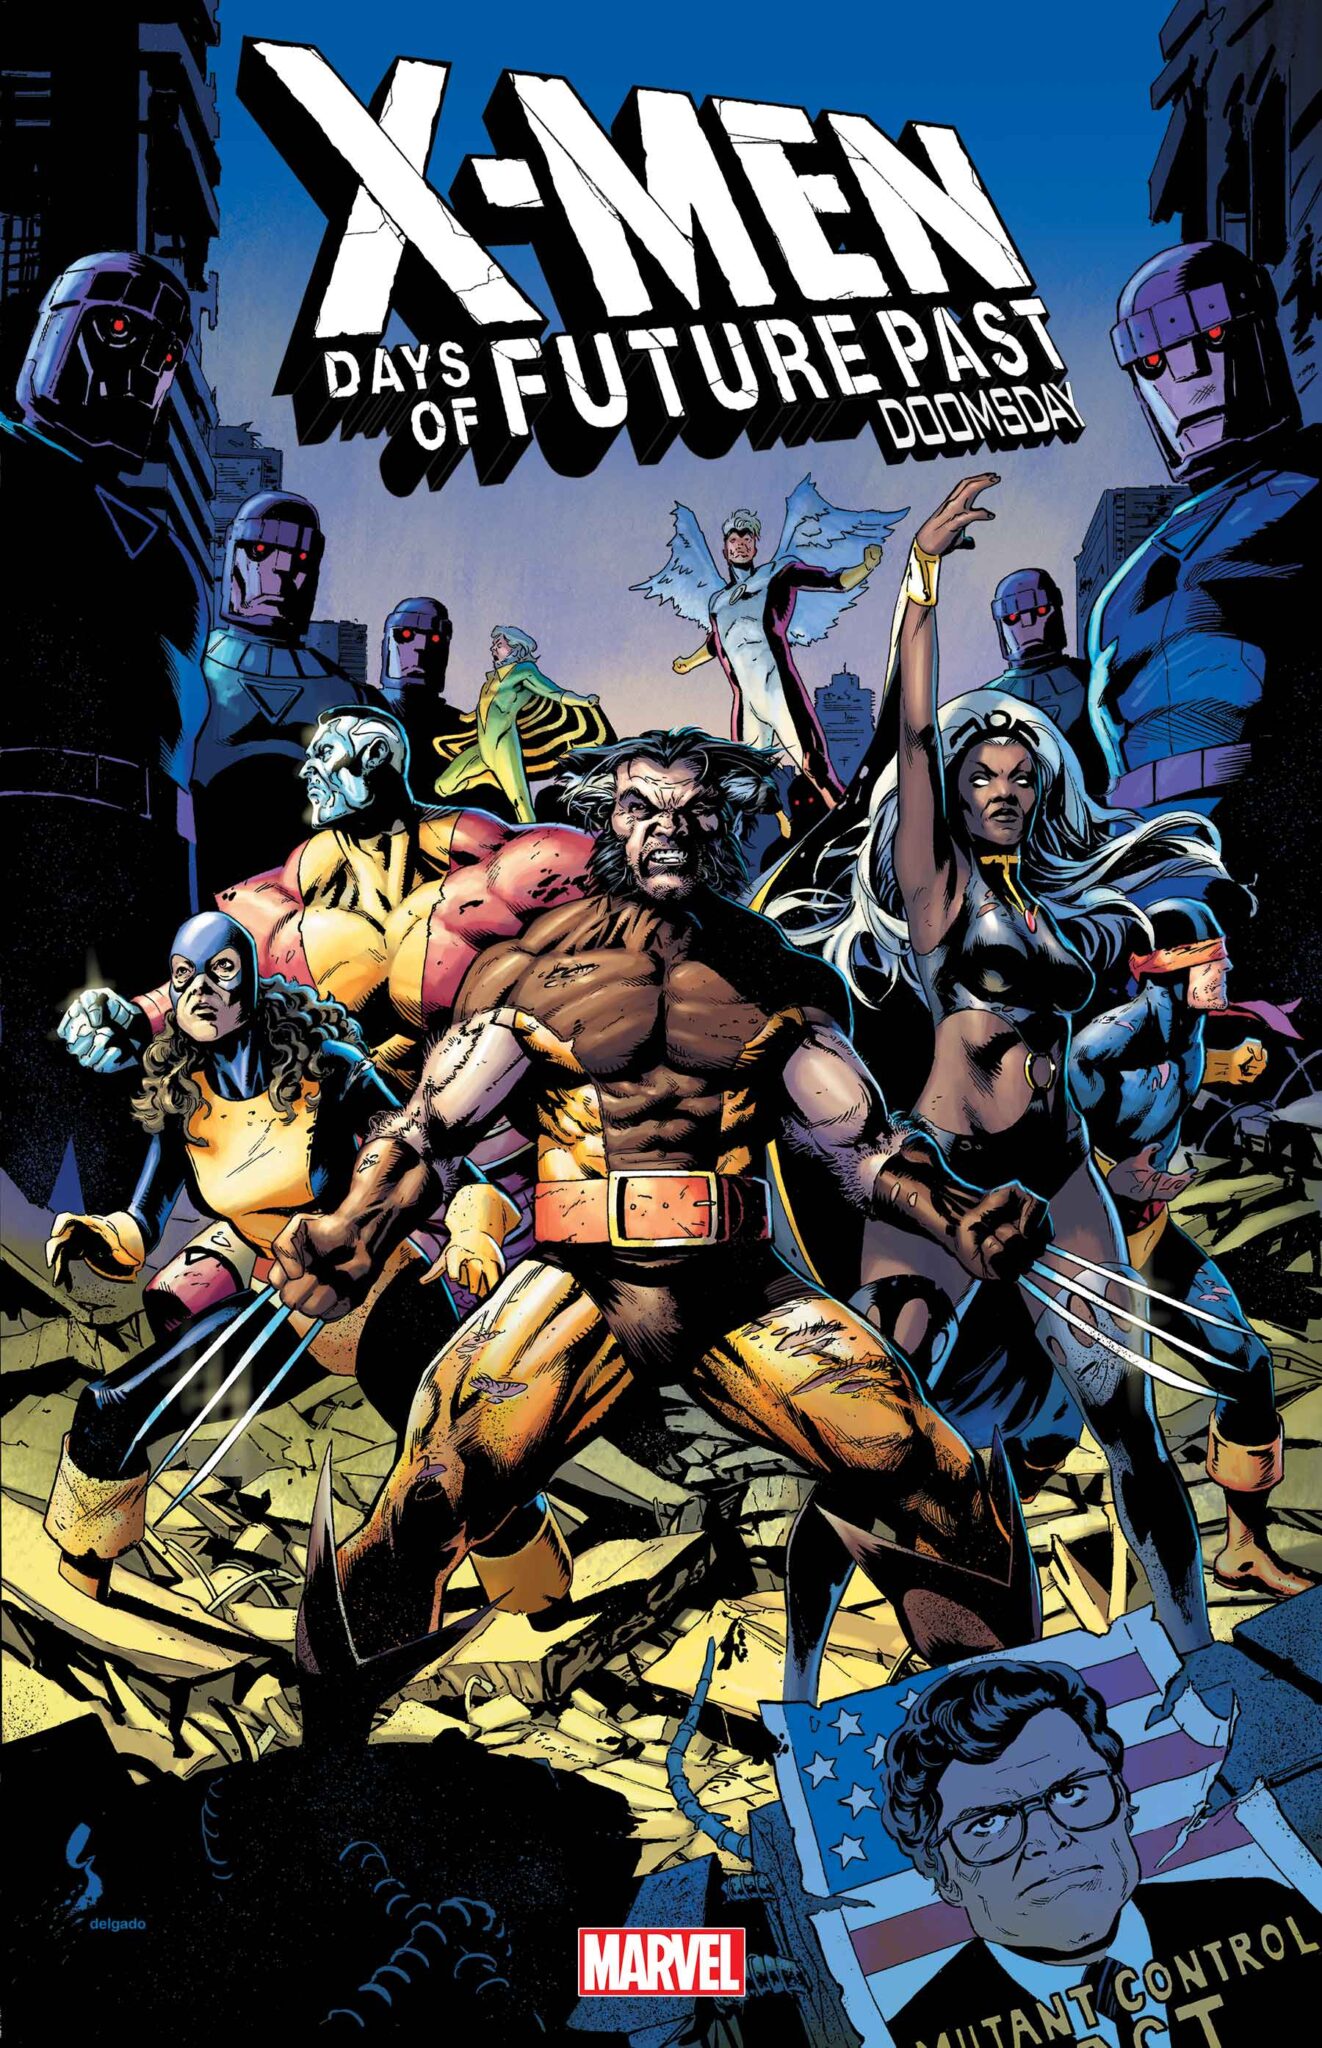 X-Men Days of Future Past: Doomsday #1 cover